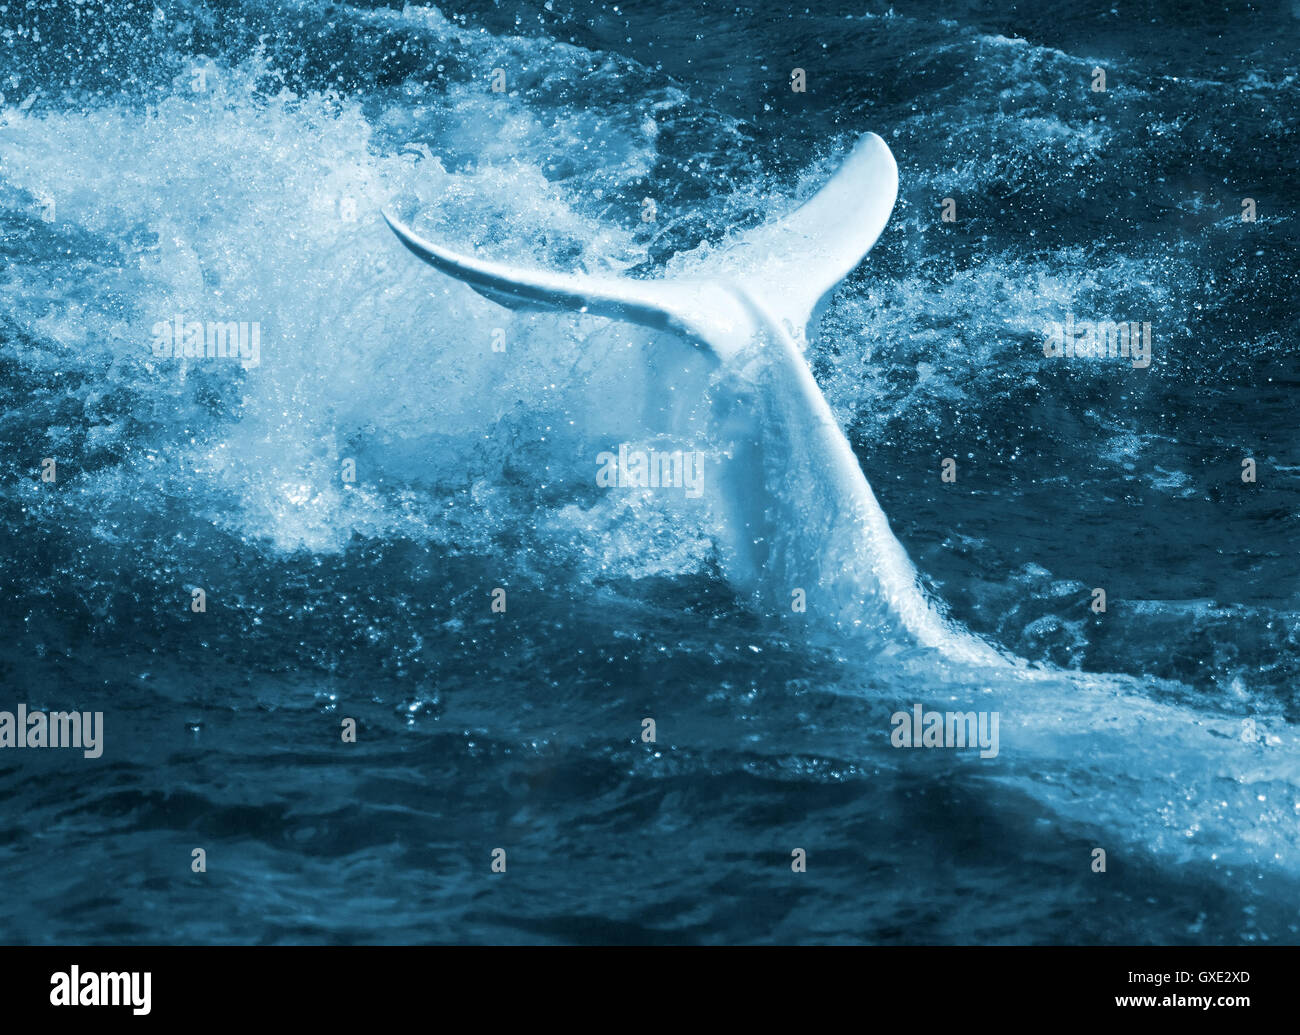 Water turbulence, foam and splashes produced by a white whale by means of its tail flipper. Stock Photo